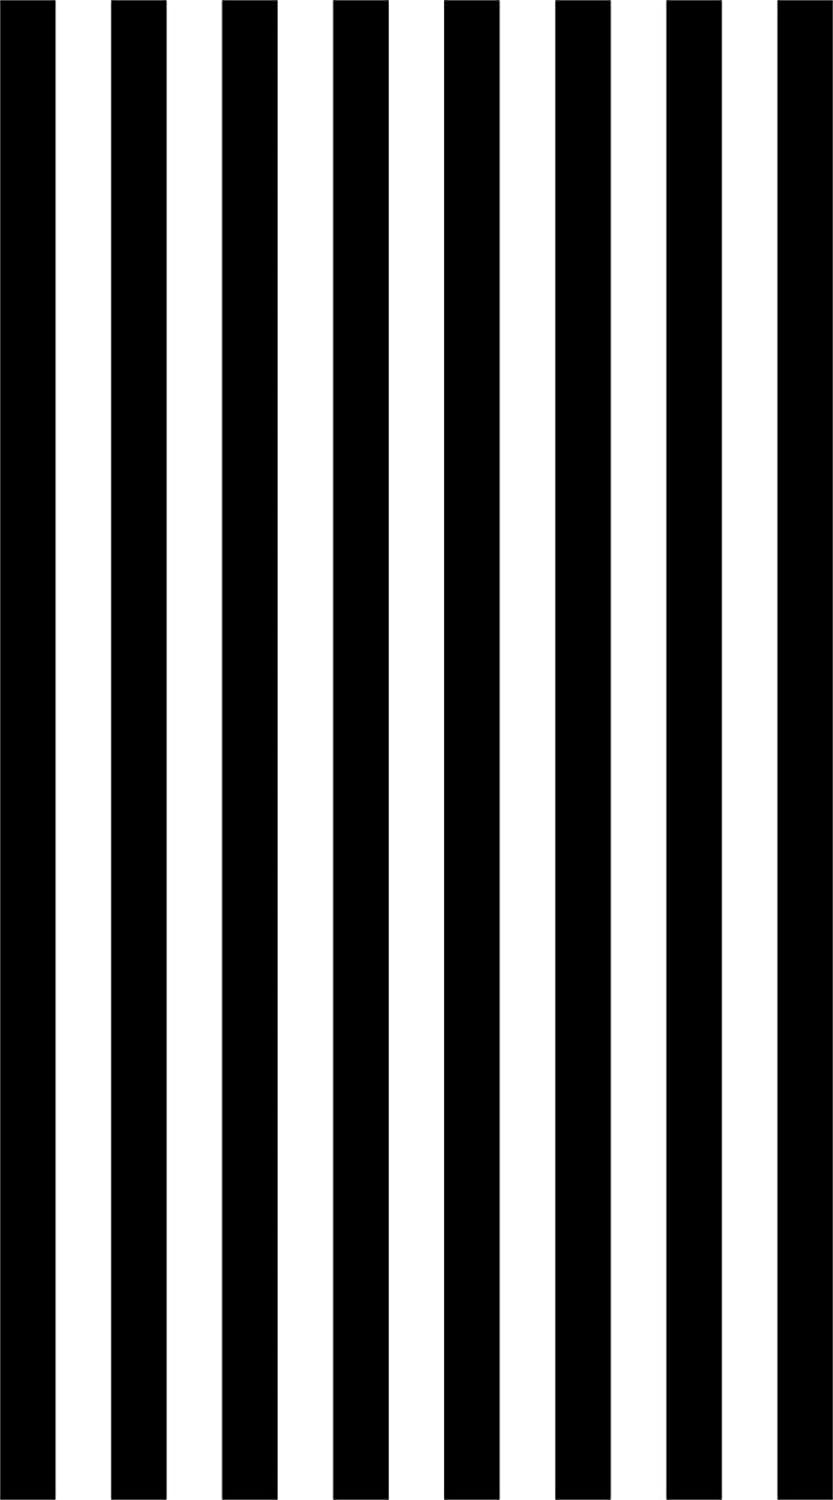 Amazon.com, 8x15ft Laeacco Black and White Stripes Backdrop for Photography Striped Background Wedding Ceremony Birthday Party Decoration Backdrops